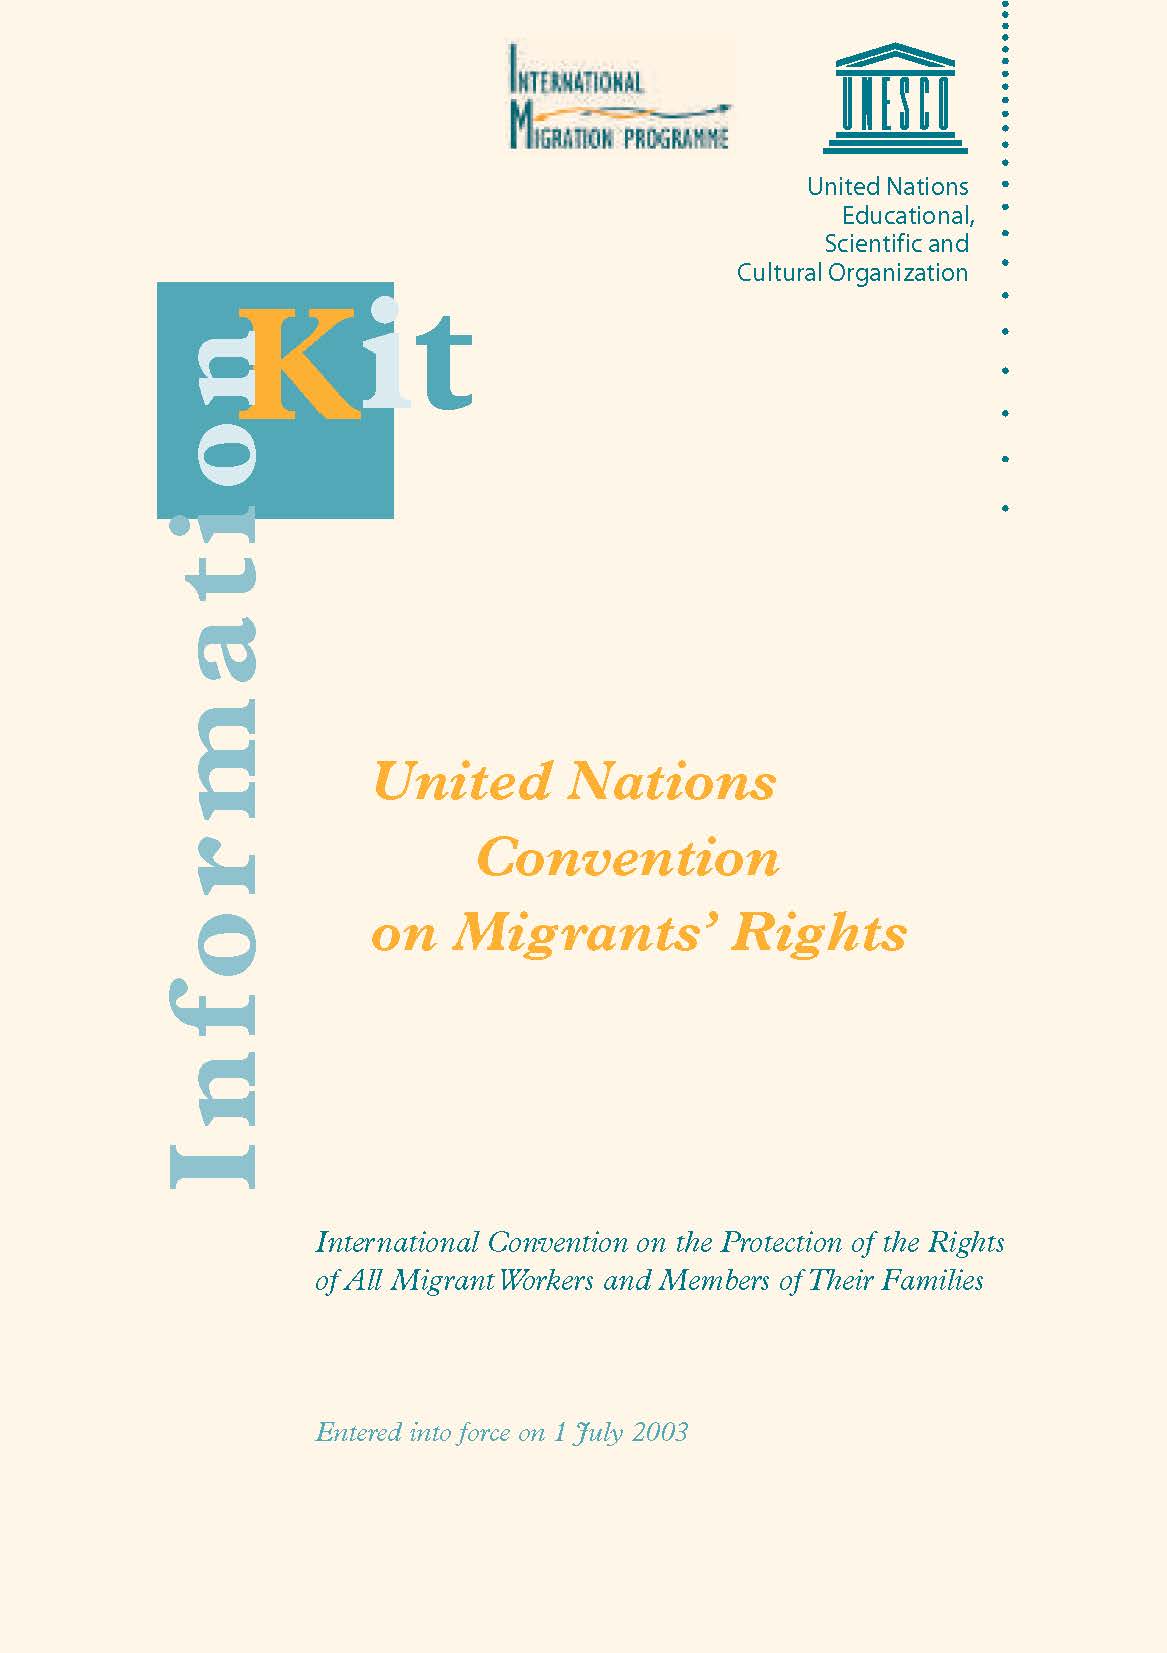 International Convention on the Protection of the Rights of All Migrant Workers and Members of Their Families